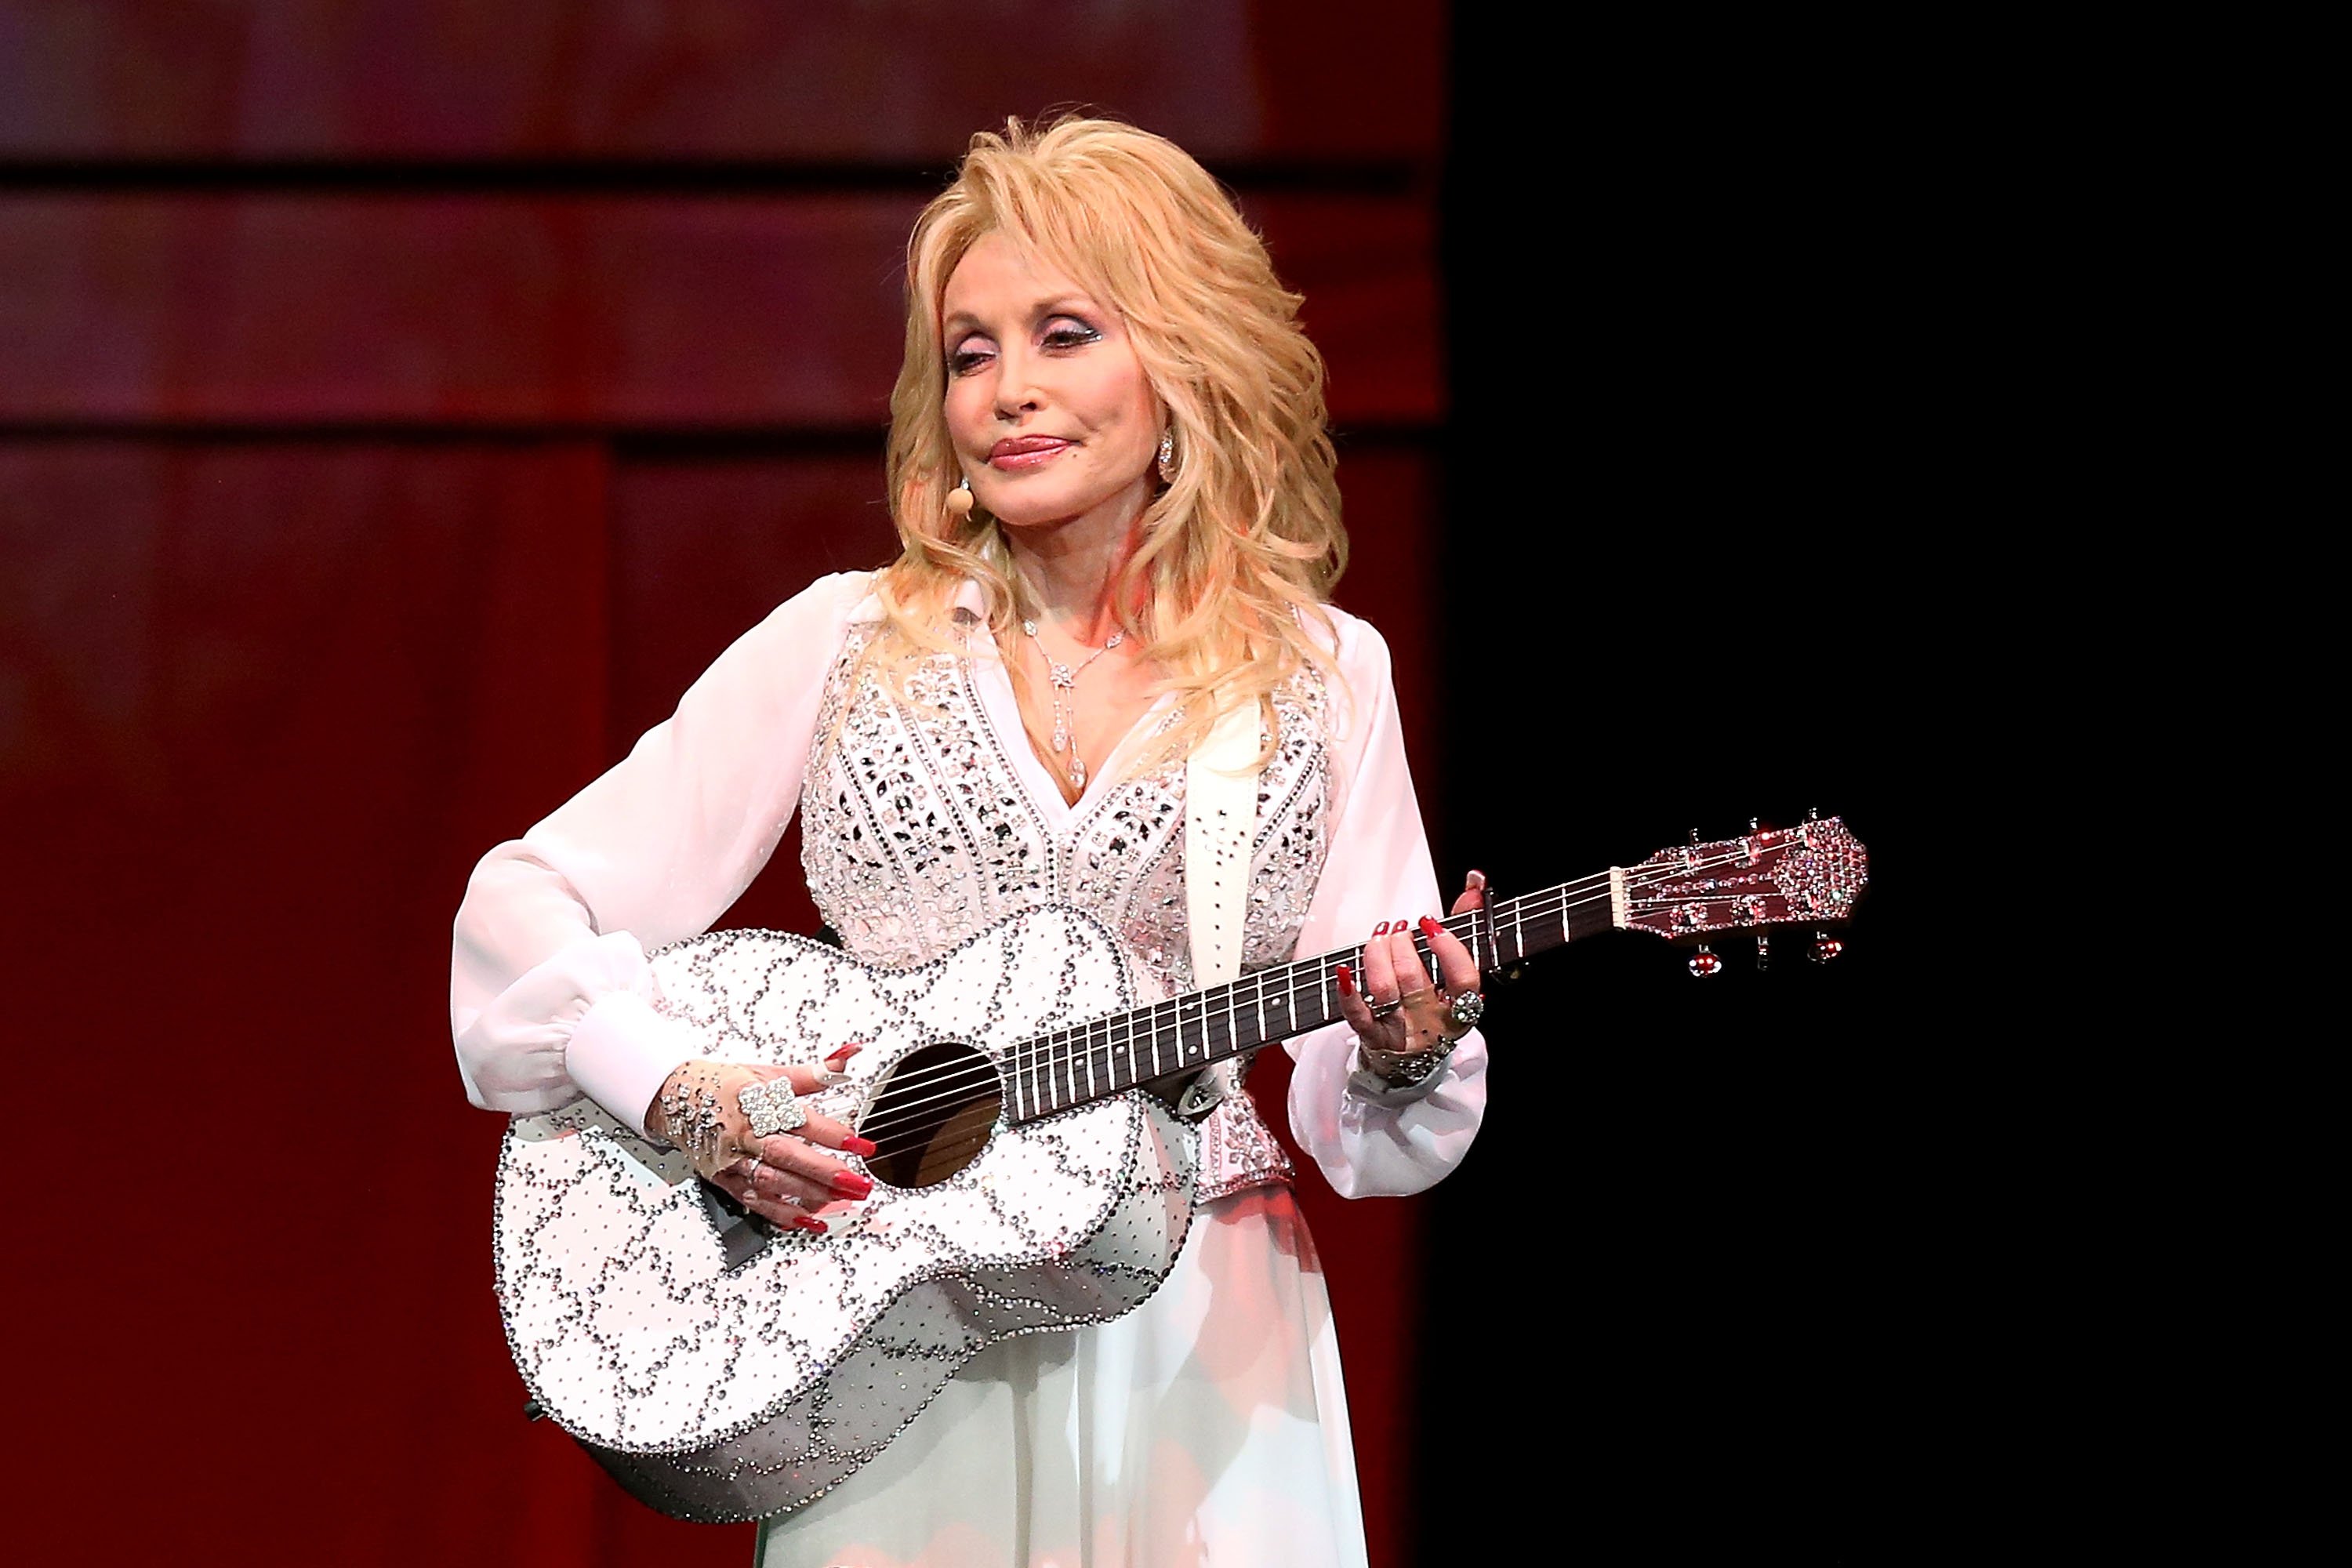 Dolly Parton performing in Australia on stage.